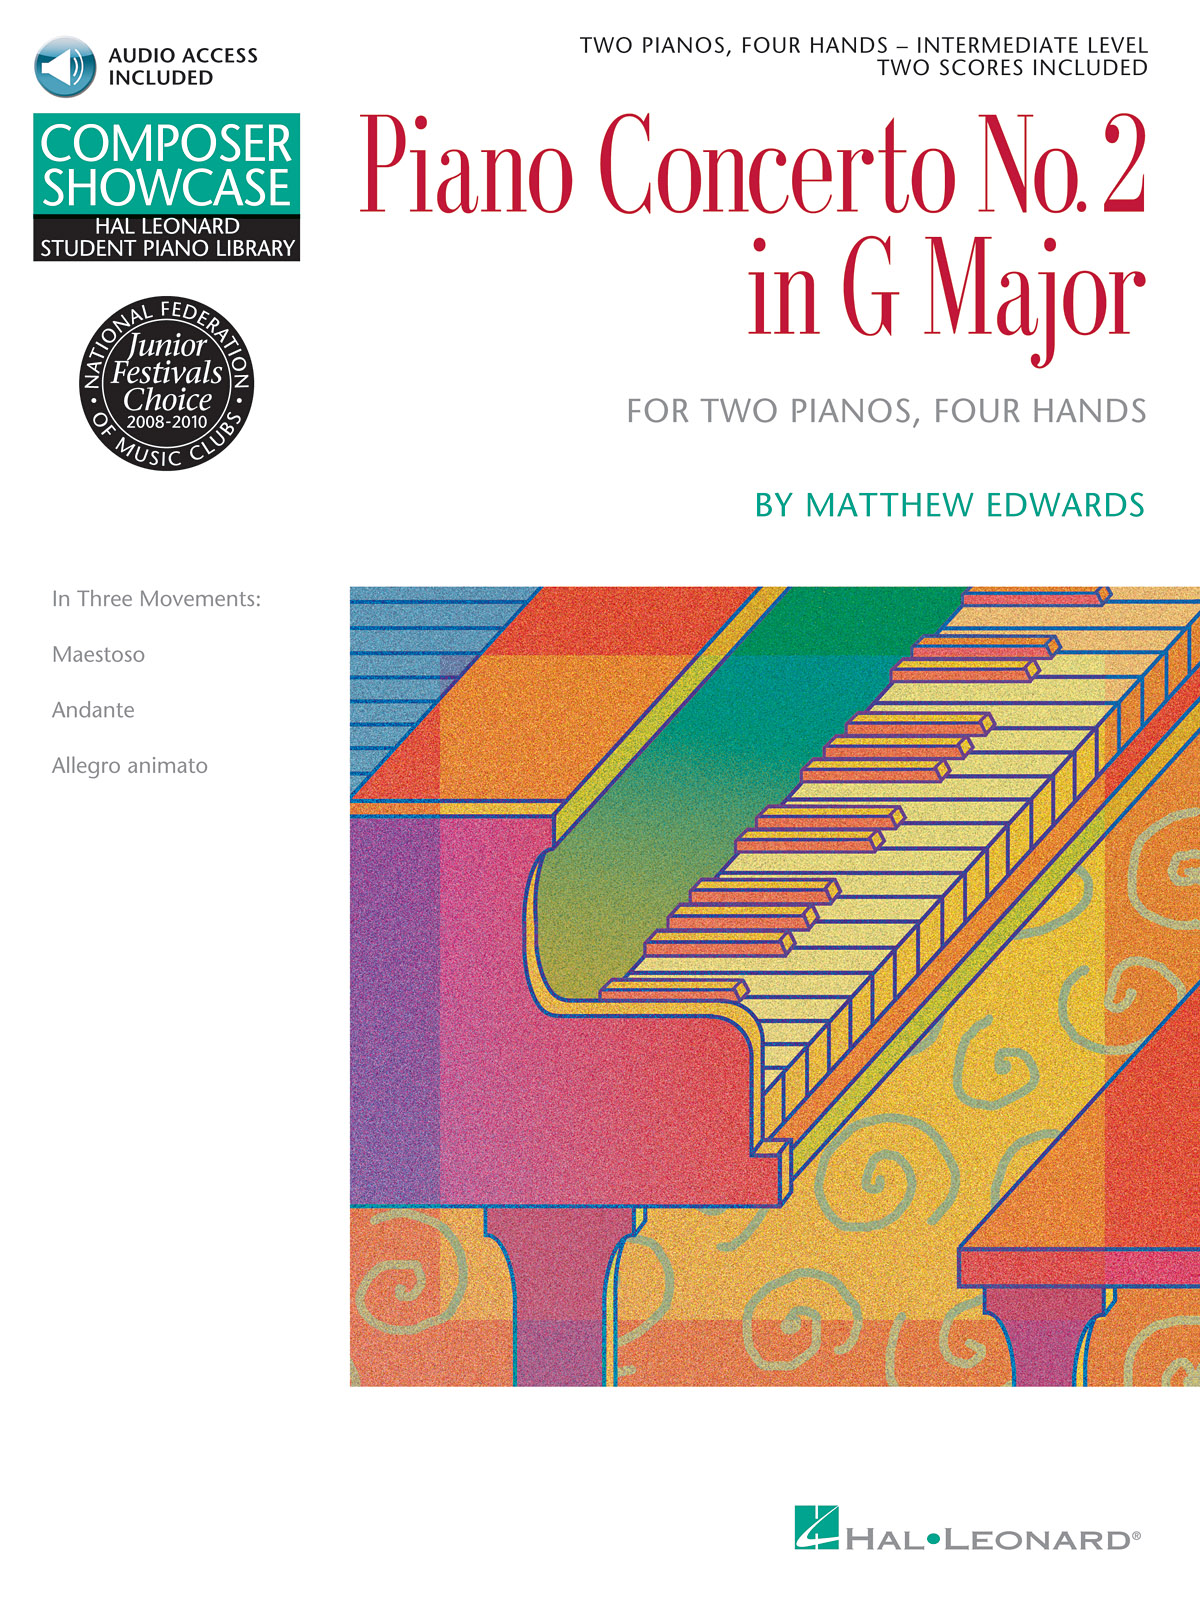 Matthew Edwards: Concerto No.2 In G For 2 Pianos  4 Hands: Piano 4 Hands: